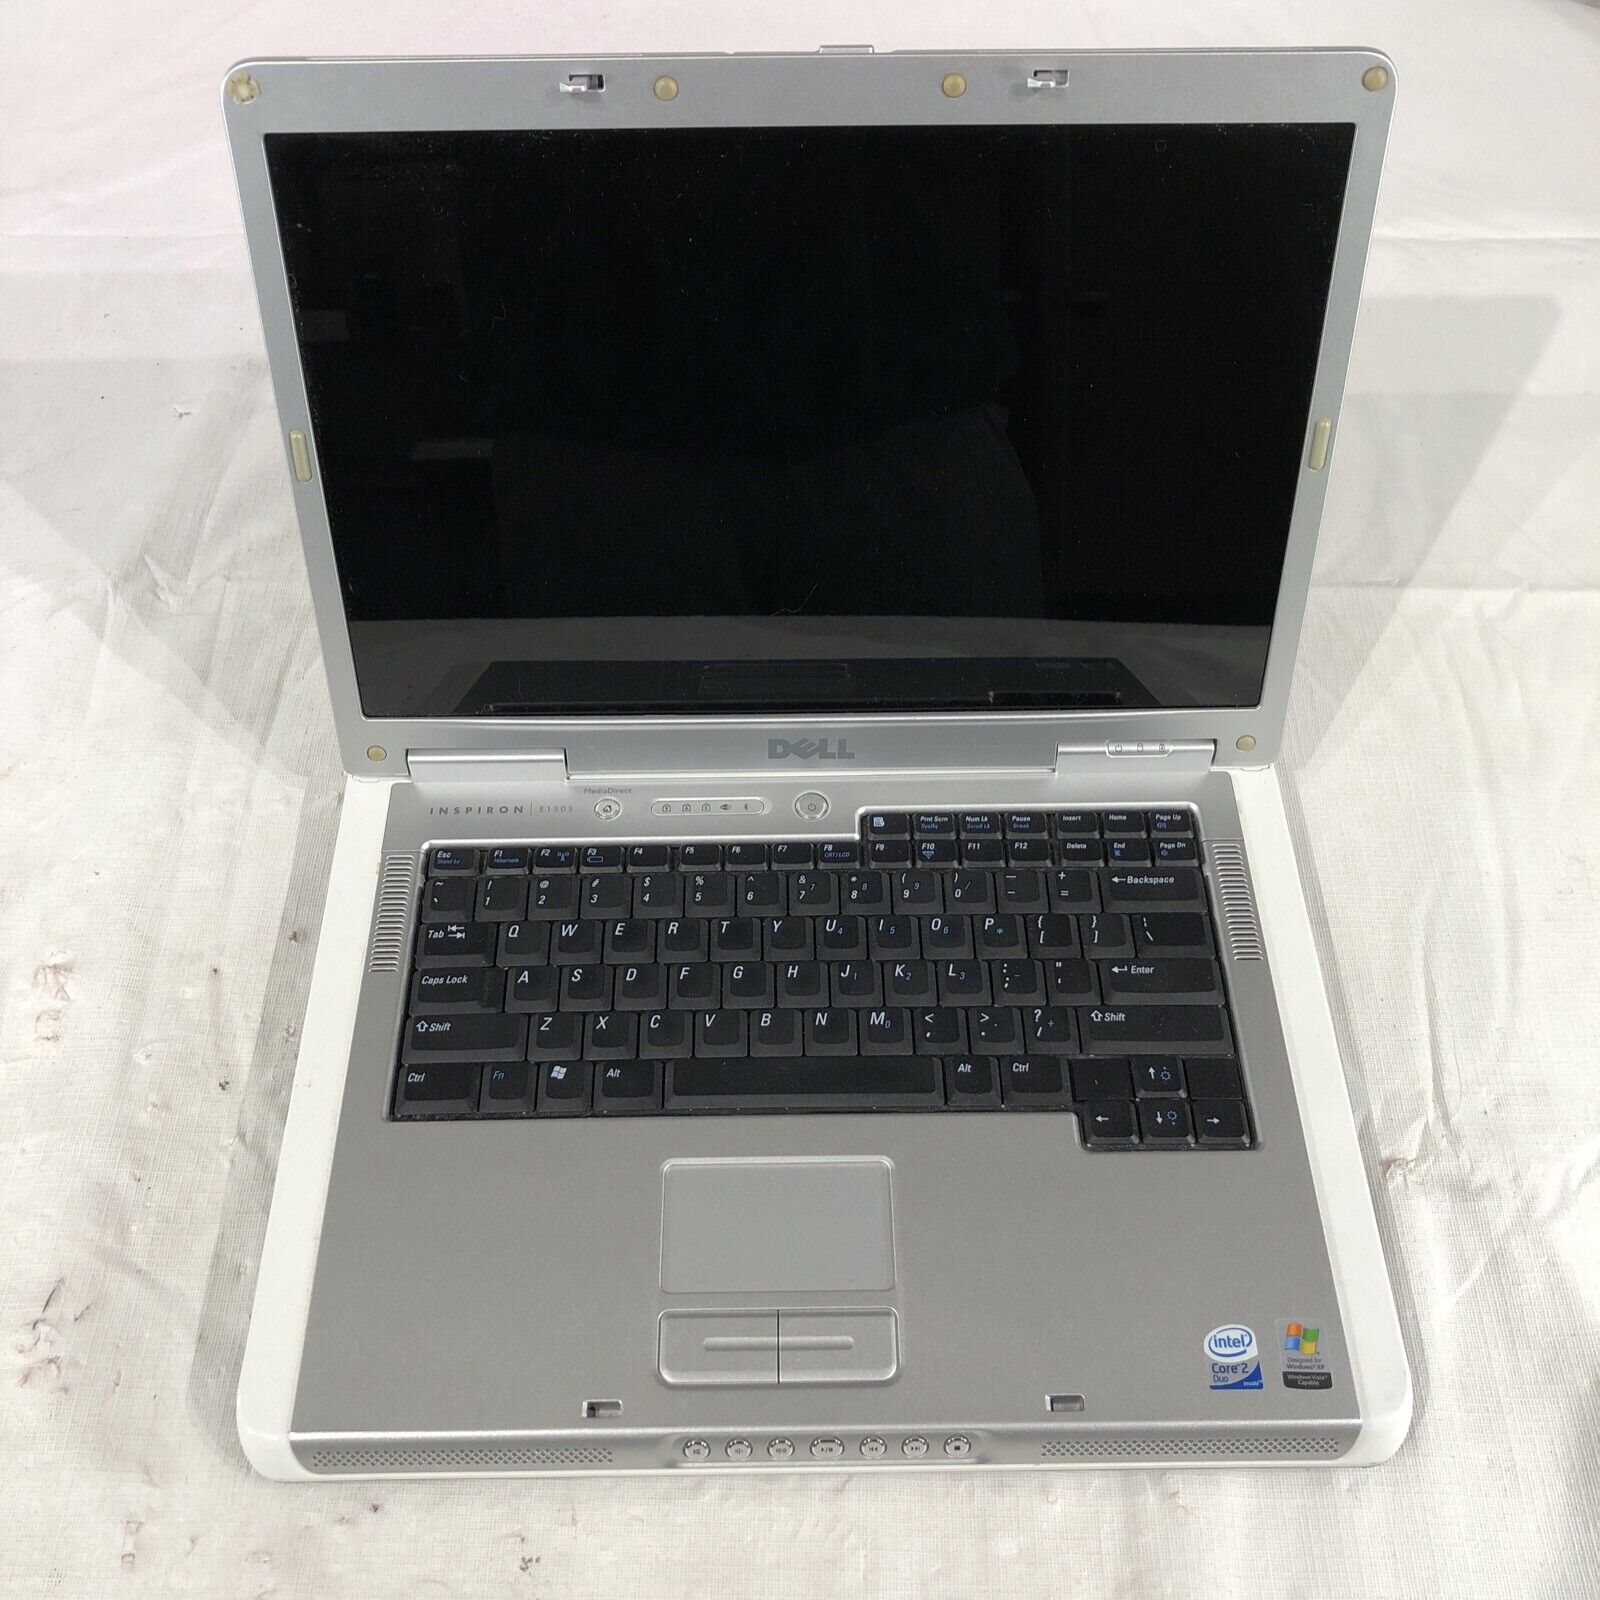 Dell Inspiron E1505 Duo 1.66Ghz 1GB RAM 16GB No HDD Or OS